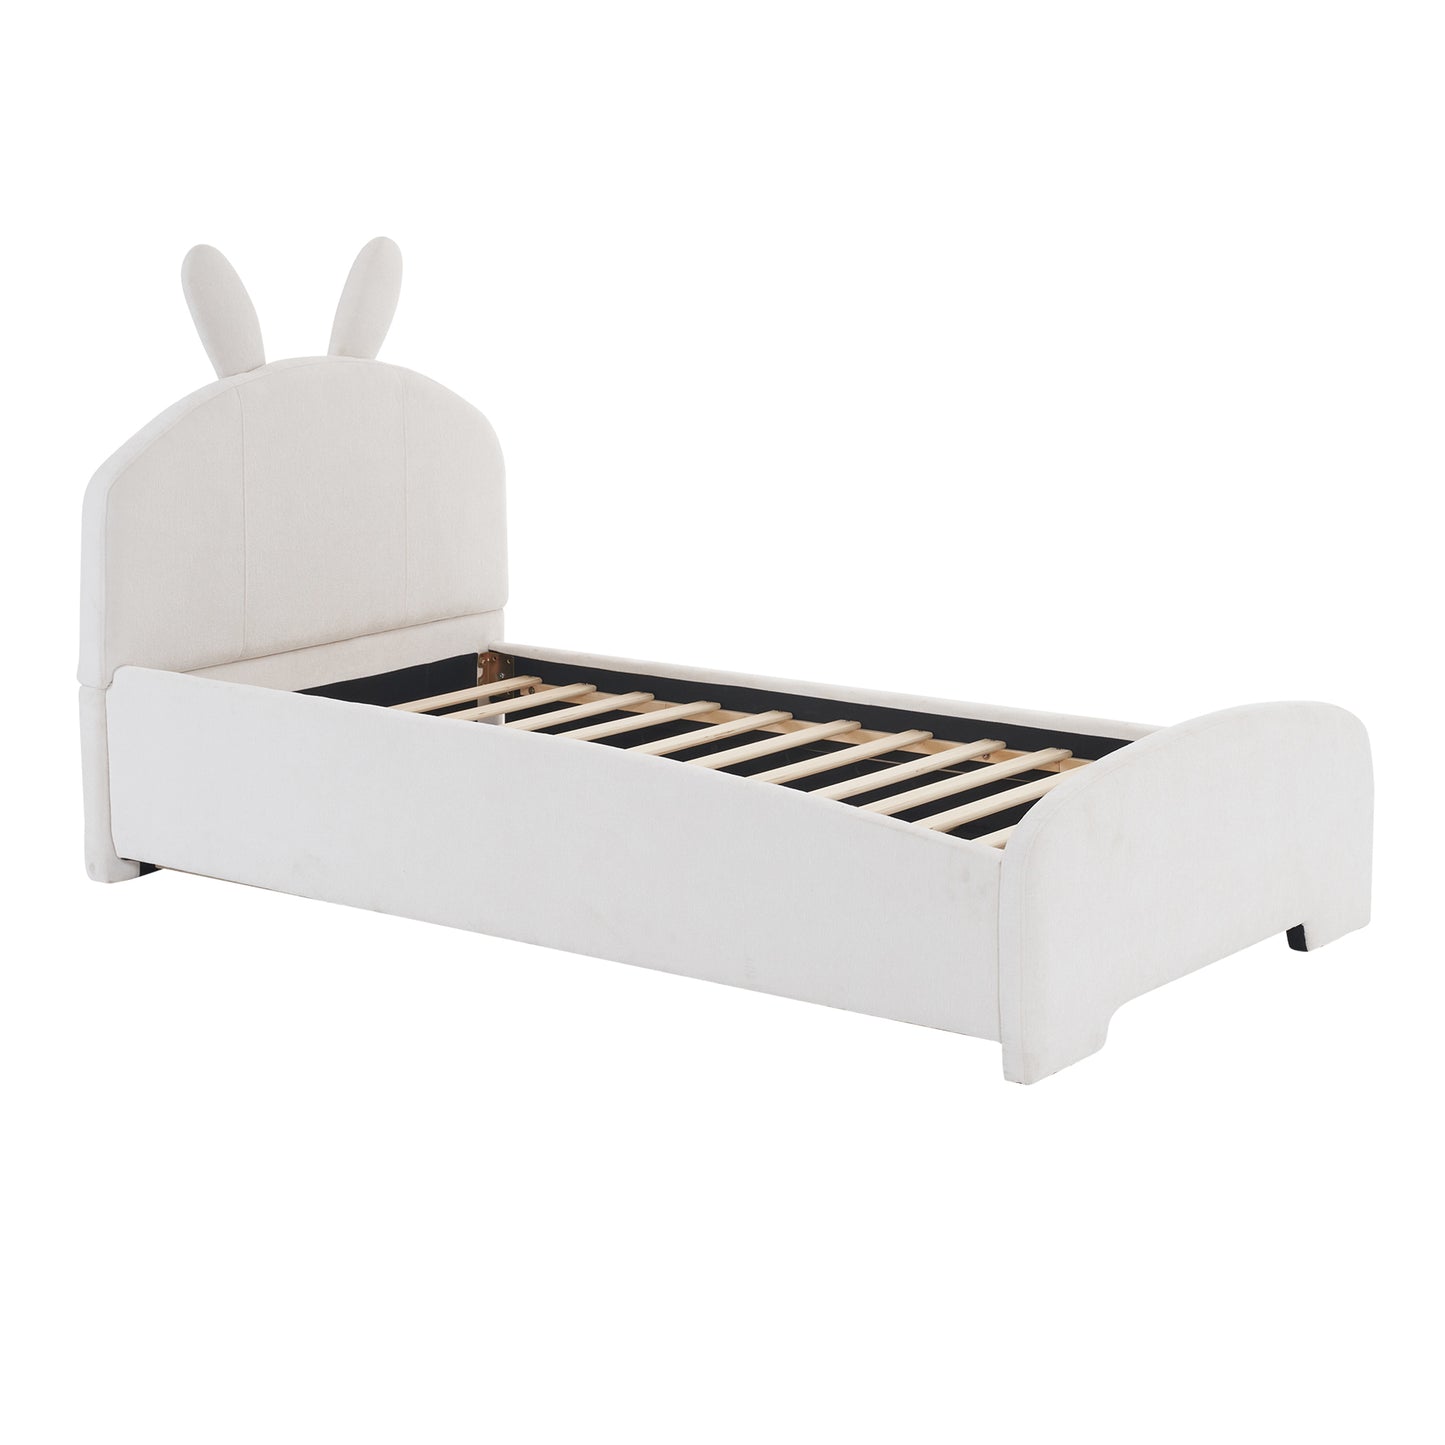 Twin Size Upholstered Platform Bed with Cartoon Ears Shaped Headboard and Trundle, White